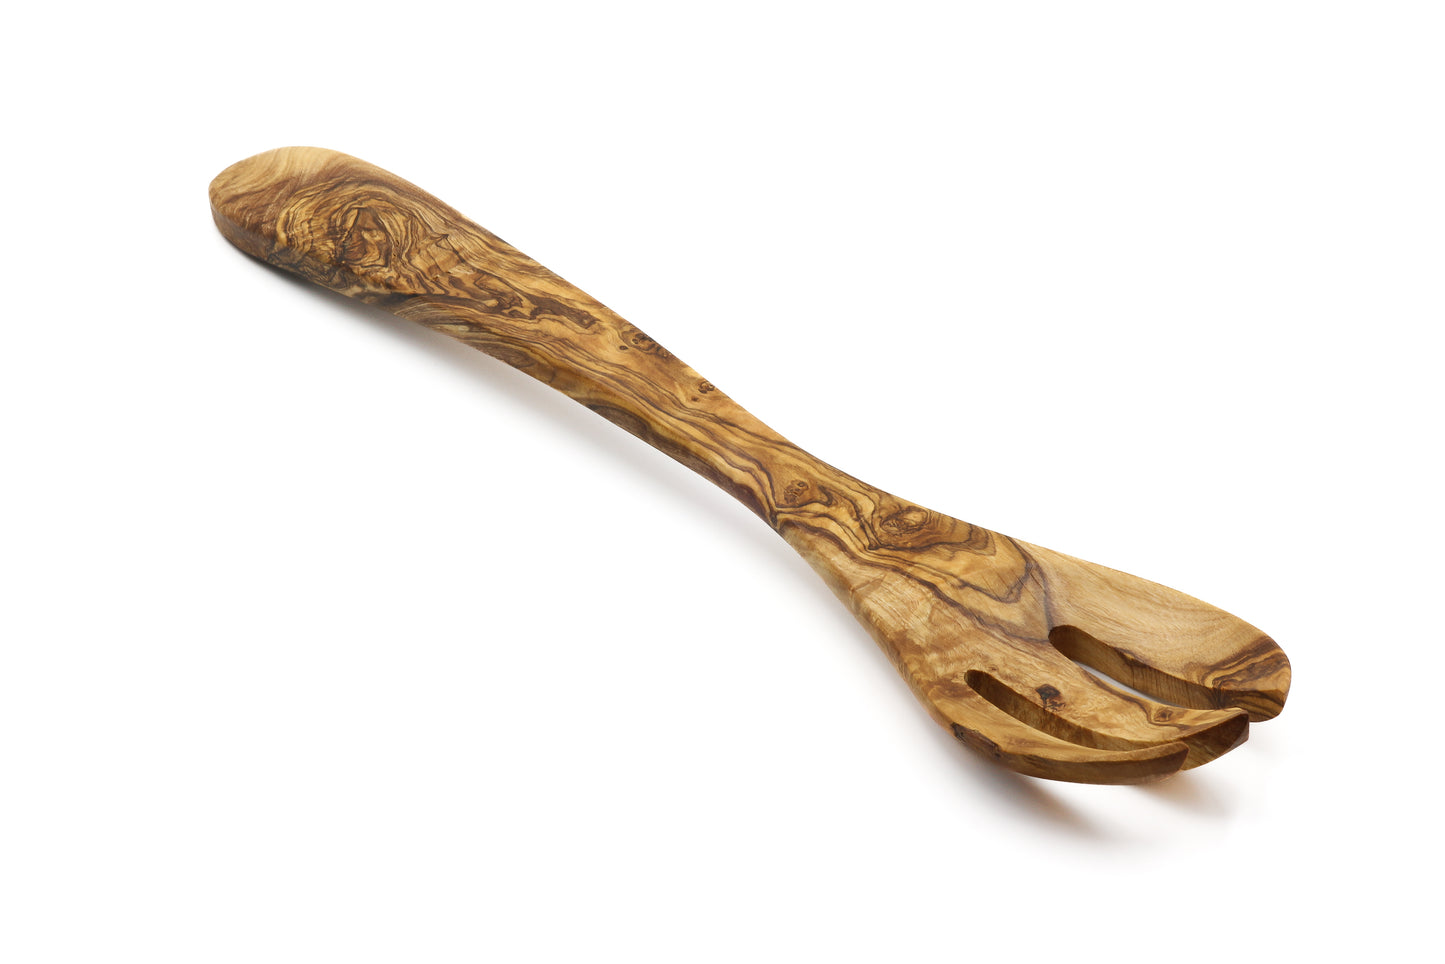 Unique olive wood salad server with a forked spoon design